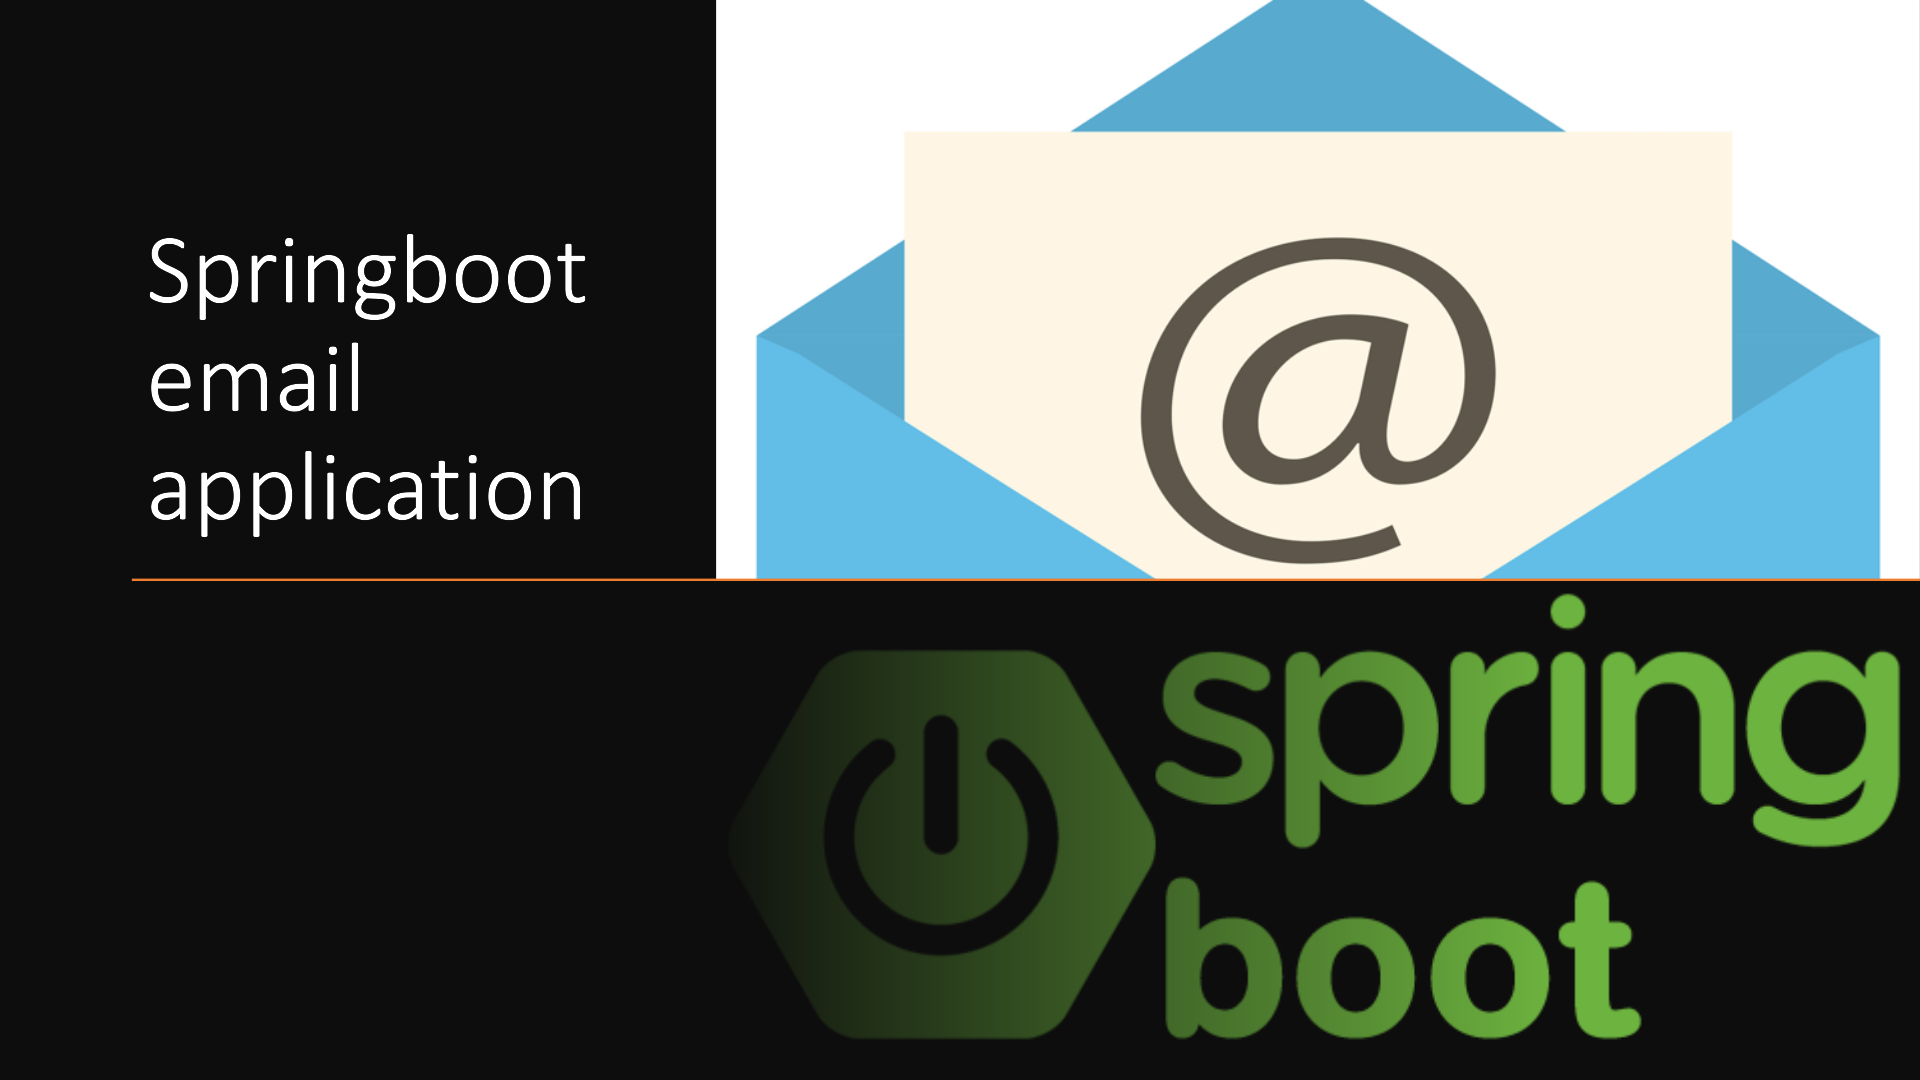 Easily-Learn-how-to-send-an-email-with-the-Springboot-email-application